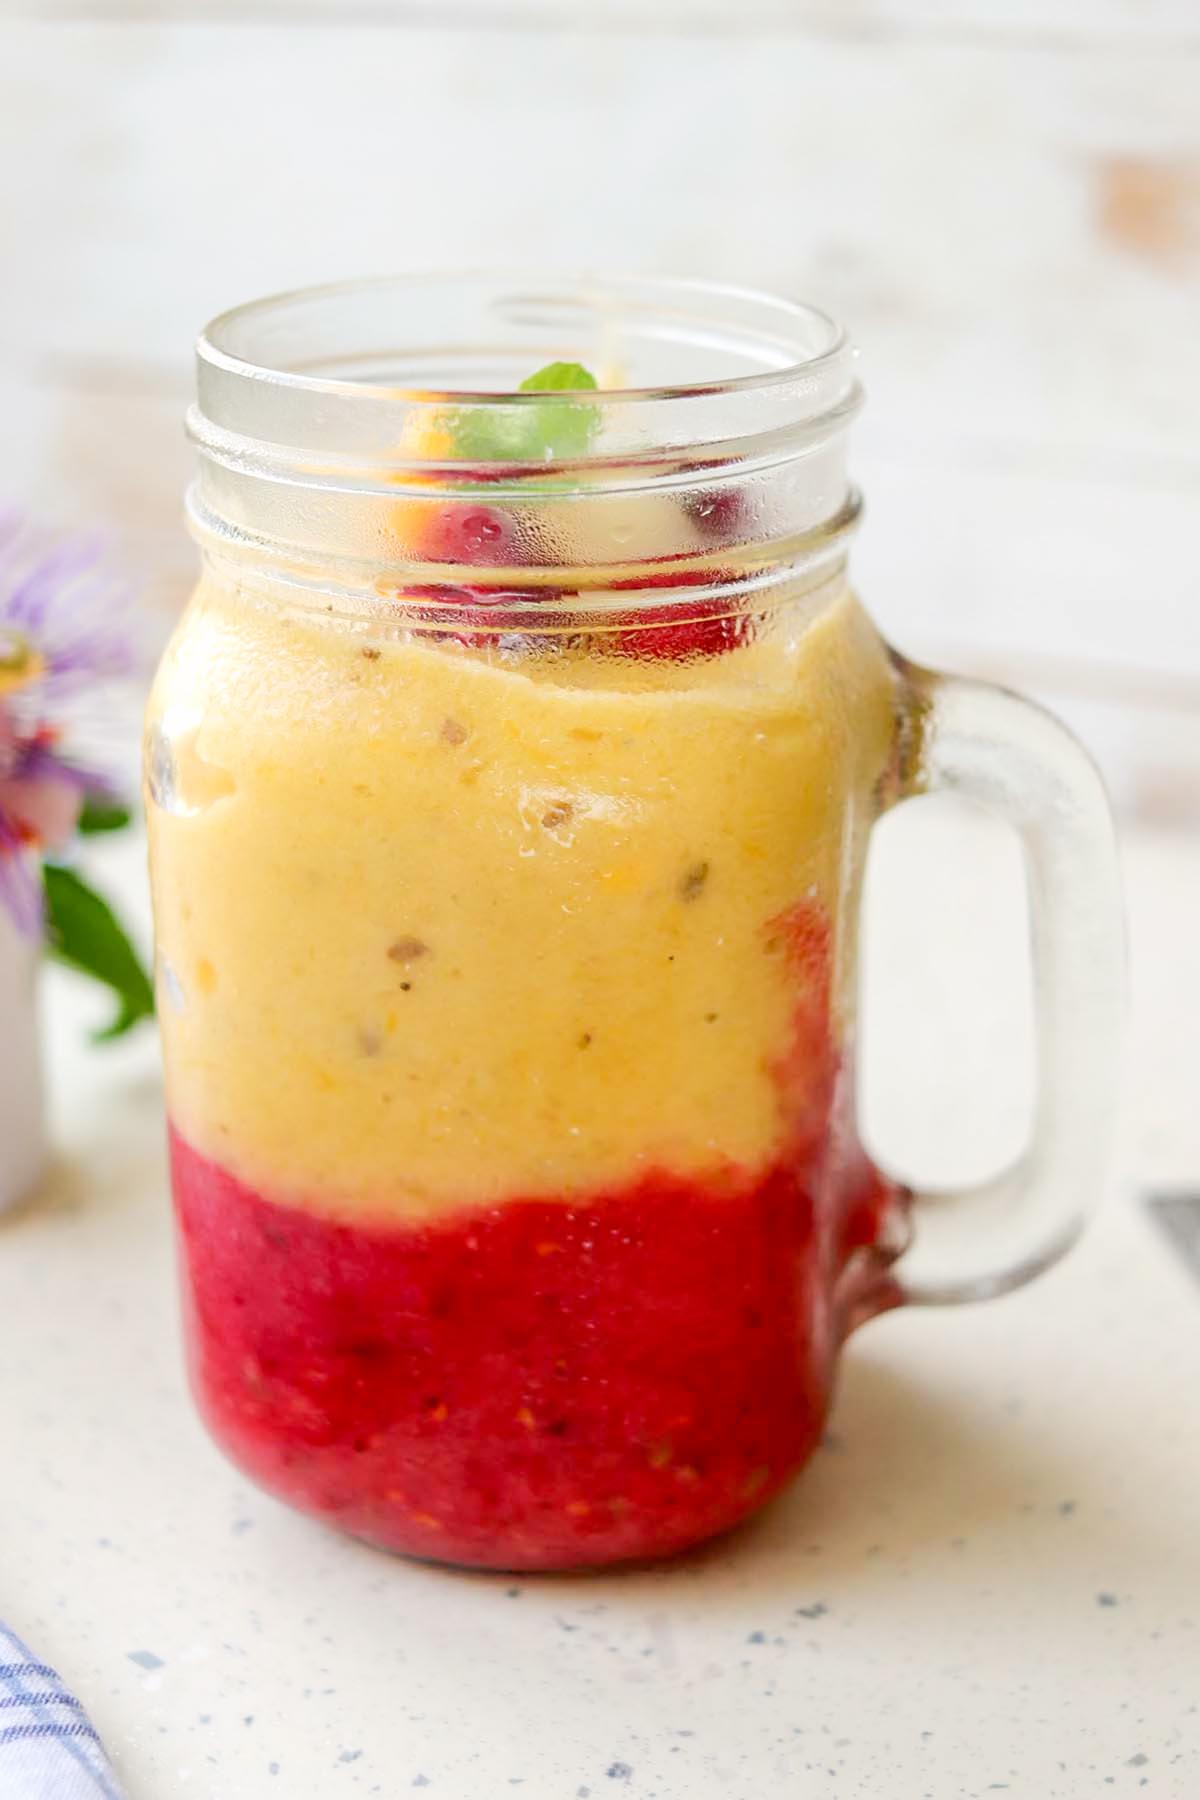 Smoothie in a glass jar.